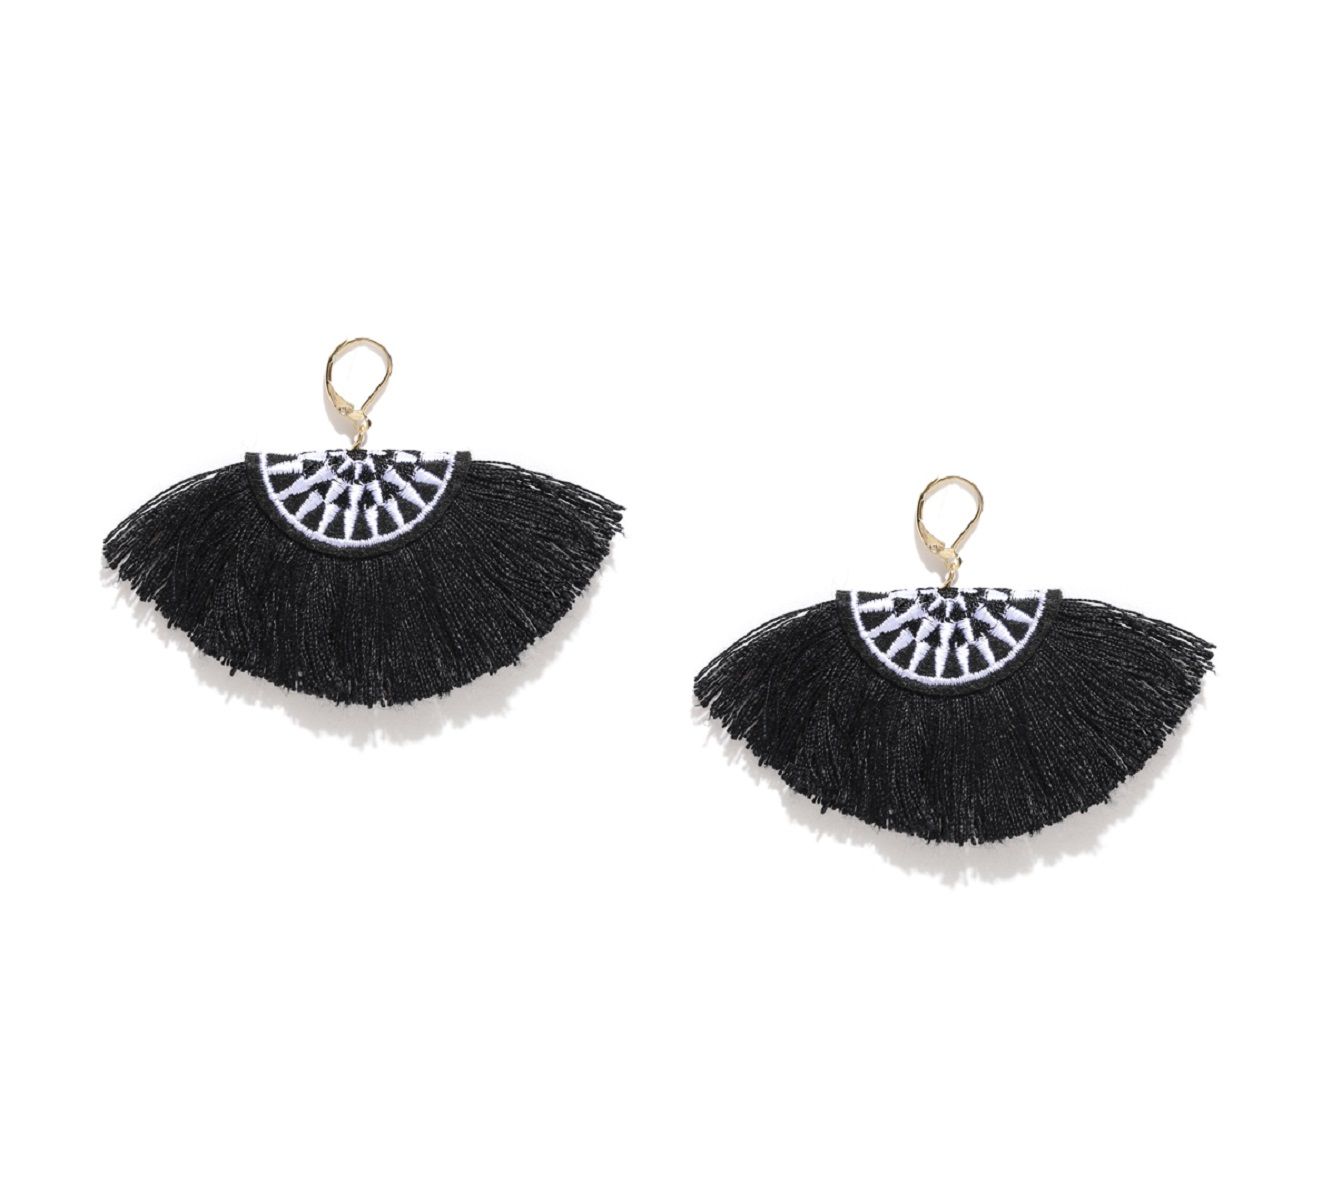 OOMPH Black Multi Layer Tassel With Crystal Elongated Drop Earrings Buy  OOMPH Black Multi Layer Tassel With Crystal Elongated Drop Earrings Online  at Best Price in India  Nykaa